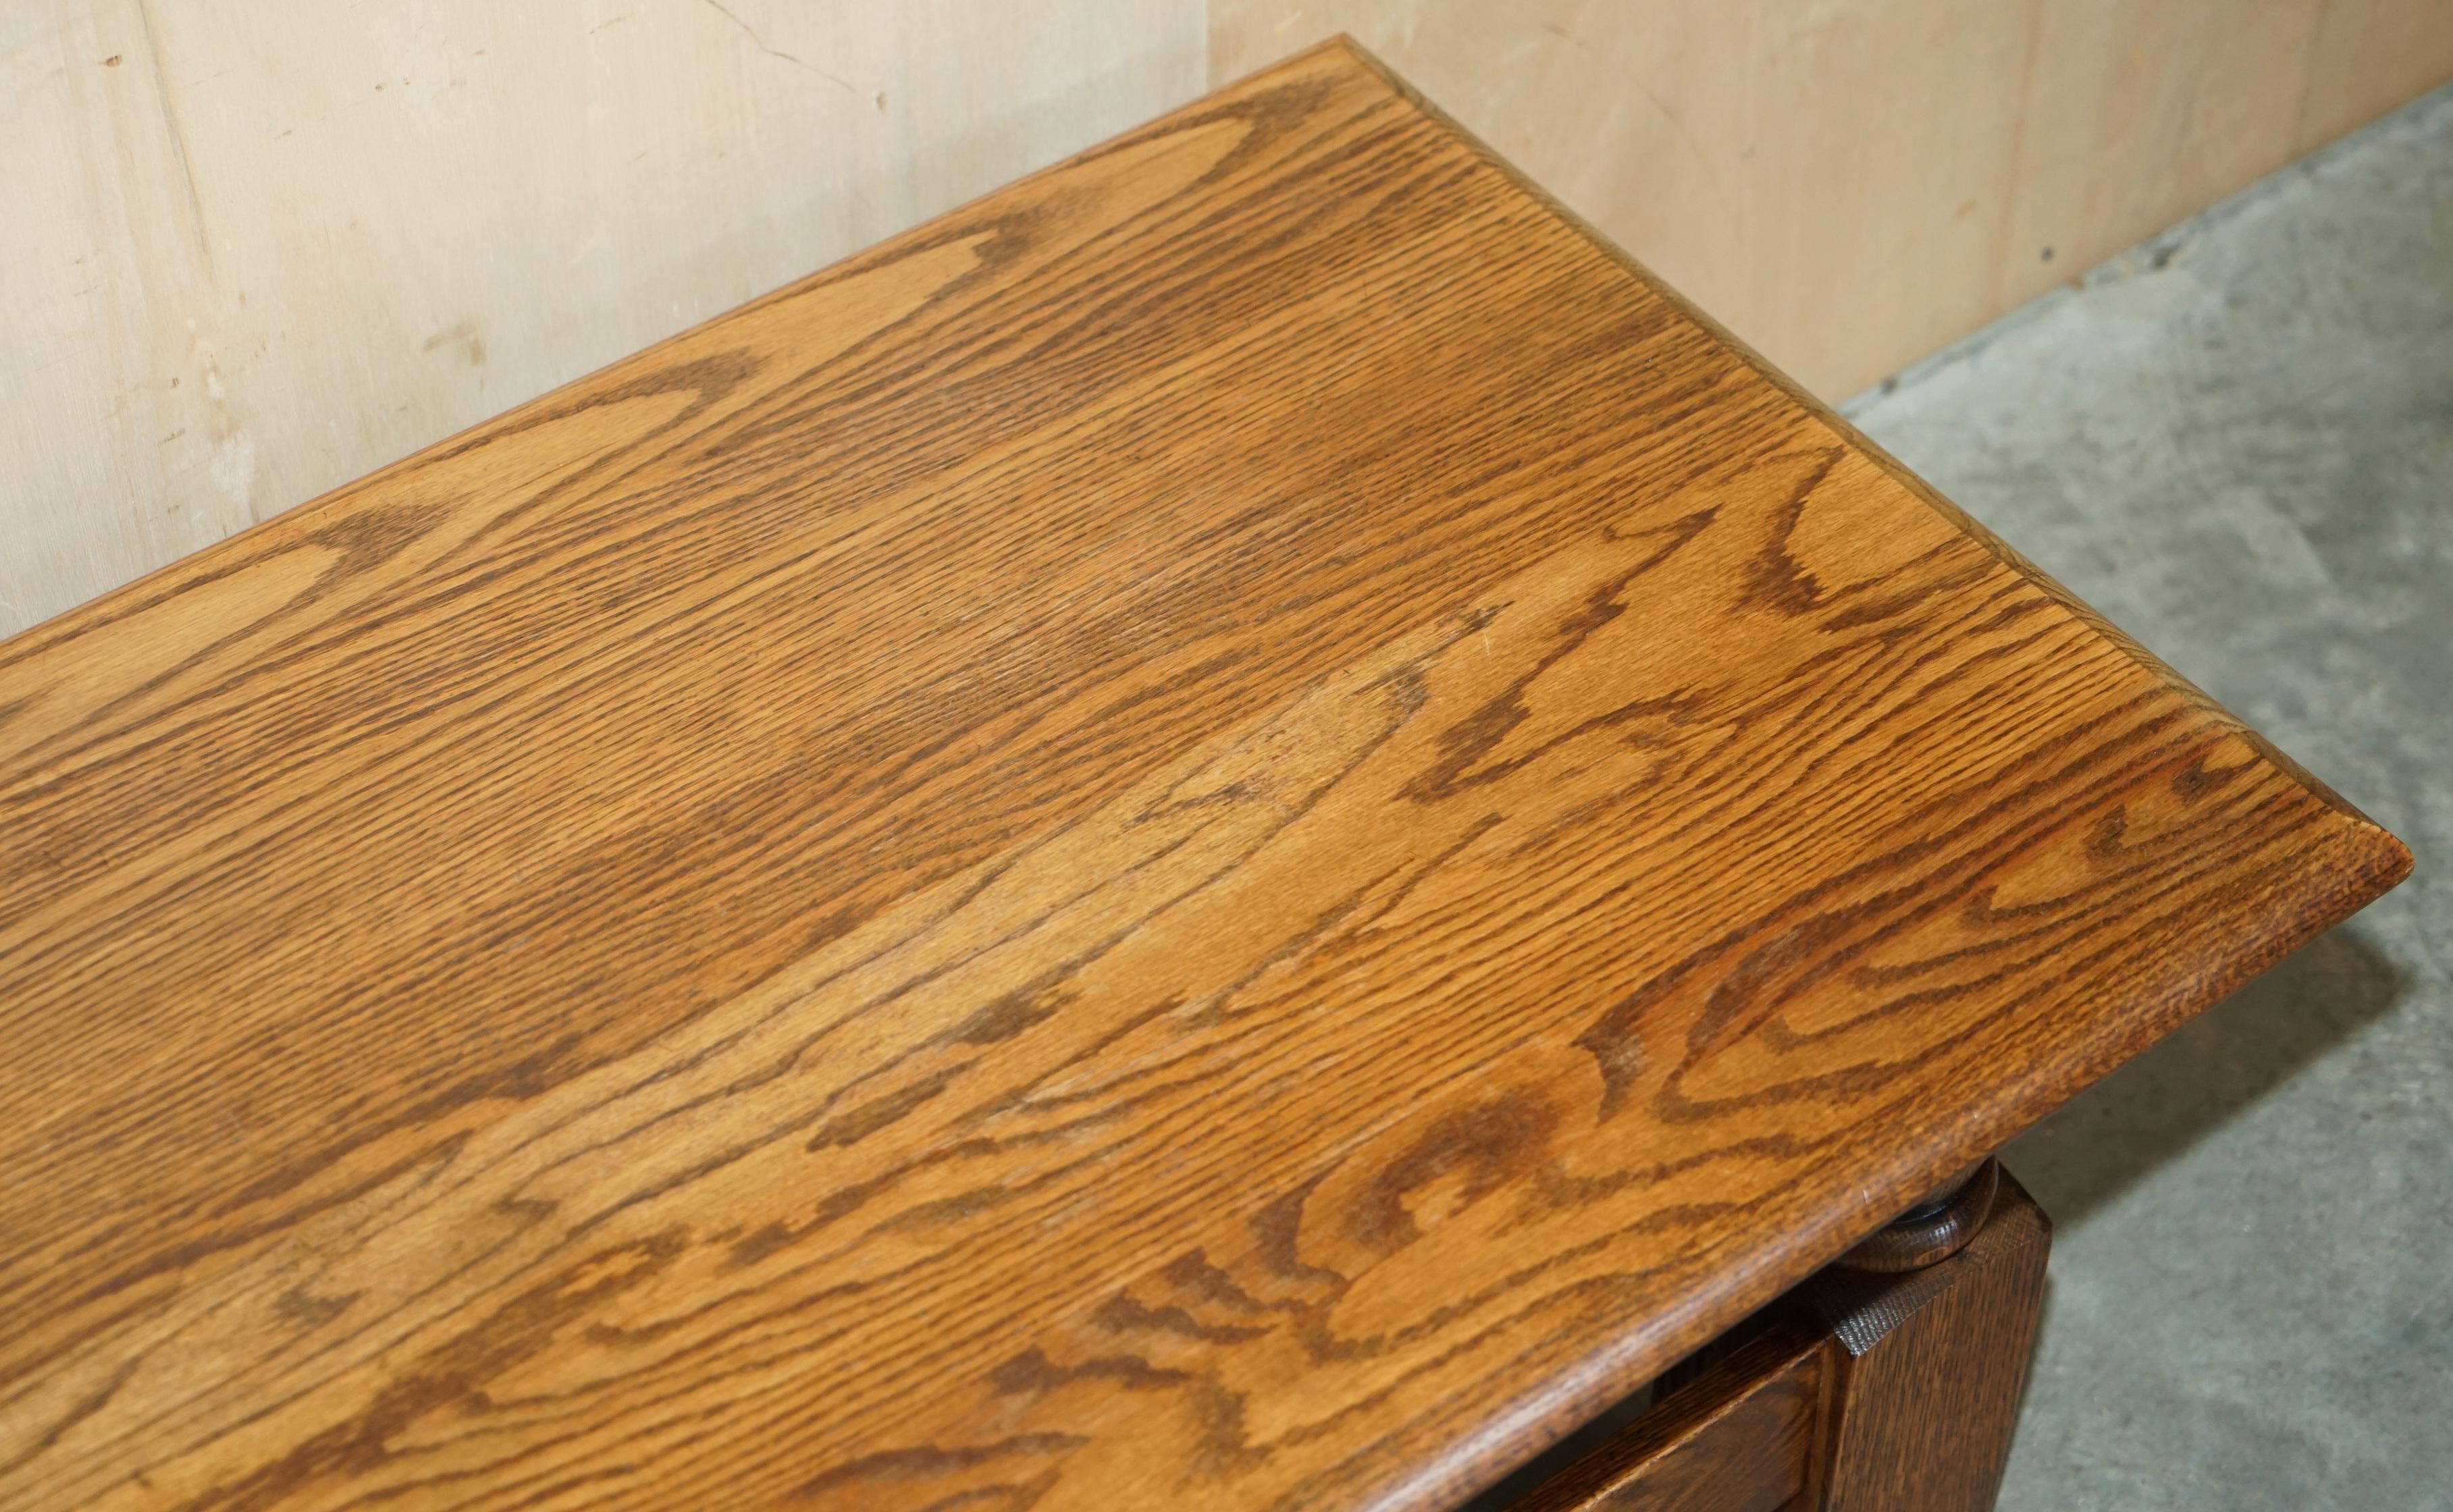 Vintage English Oak Coffee Table Made in the Style of Edwardian Refectory Tables For Sale 2